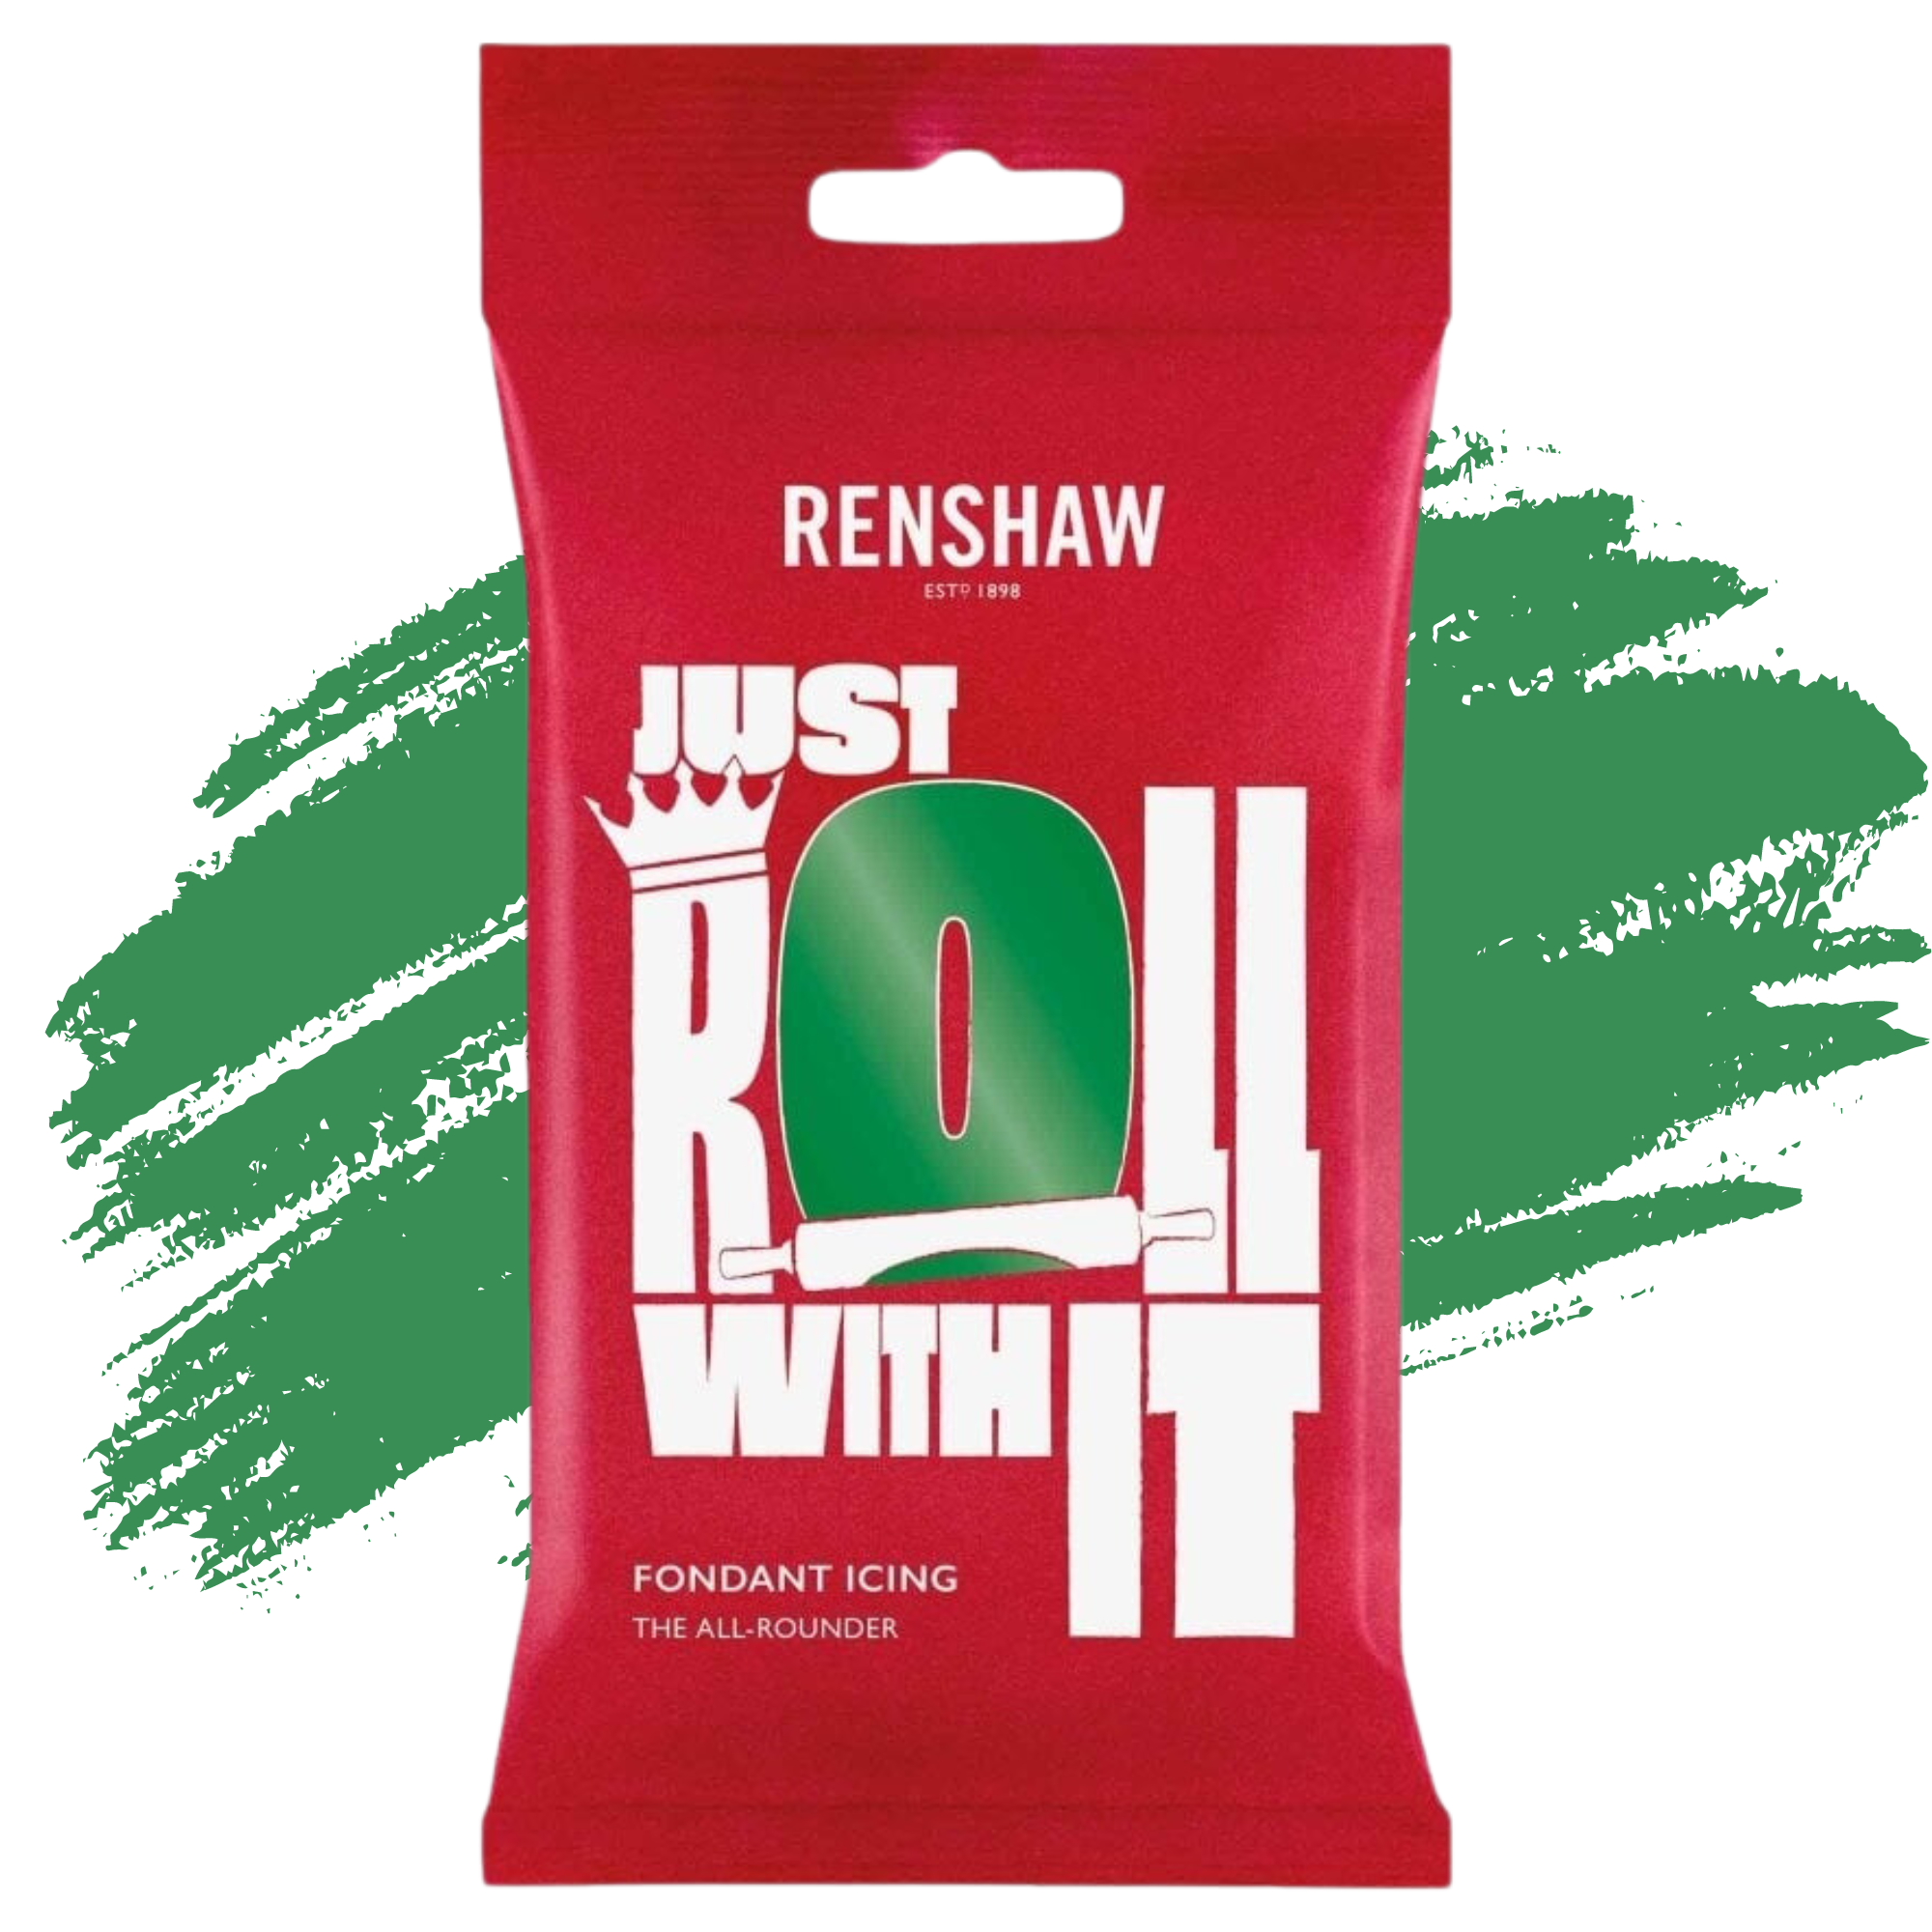 Renshaw Professional Sugar Paste Ready to Roll Fondant Just Roll with it Icing - Emerald Green - 250g